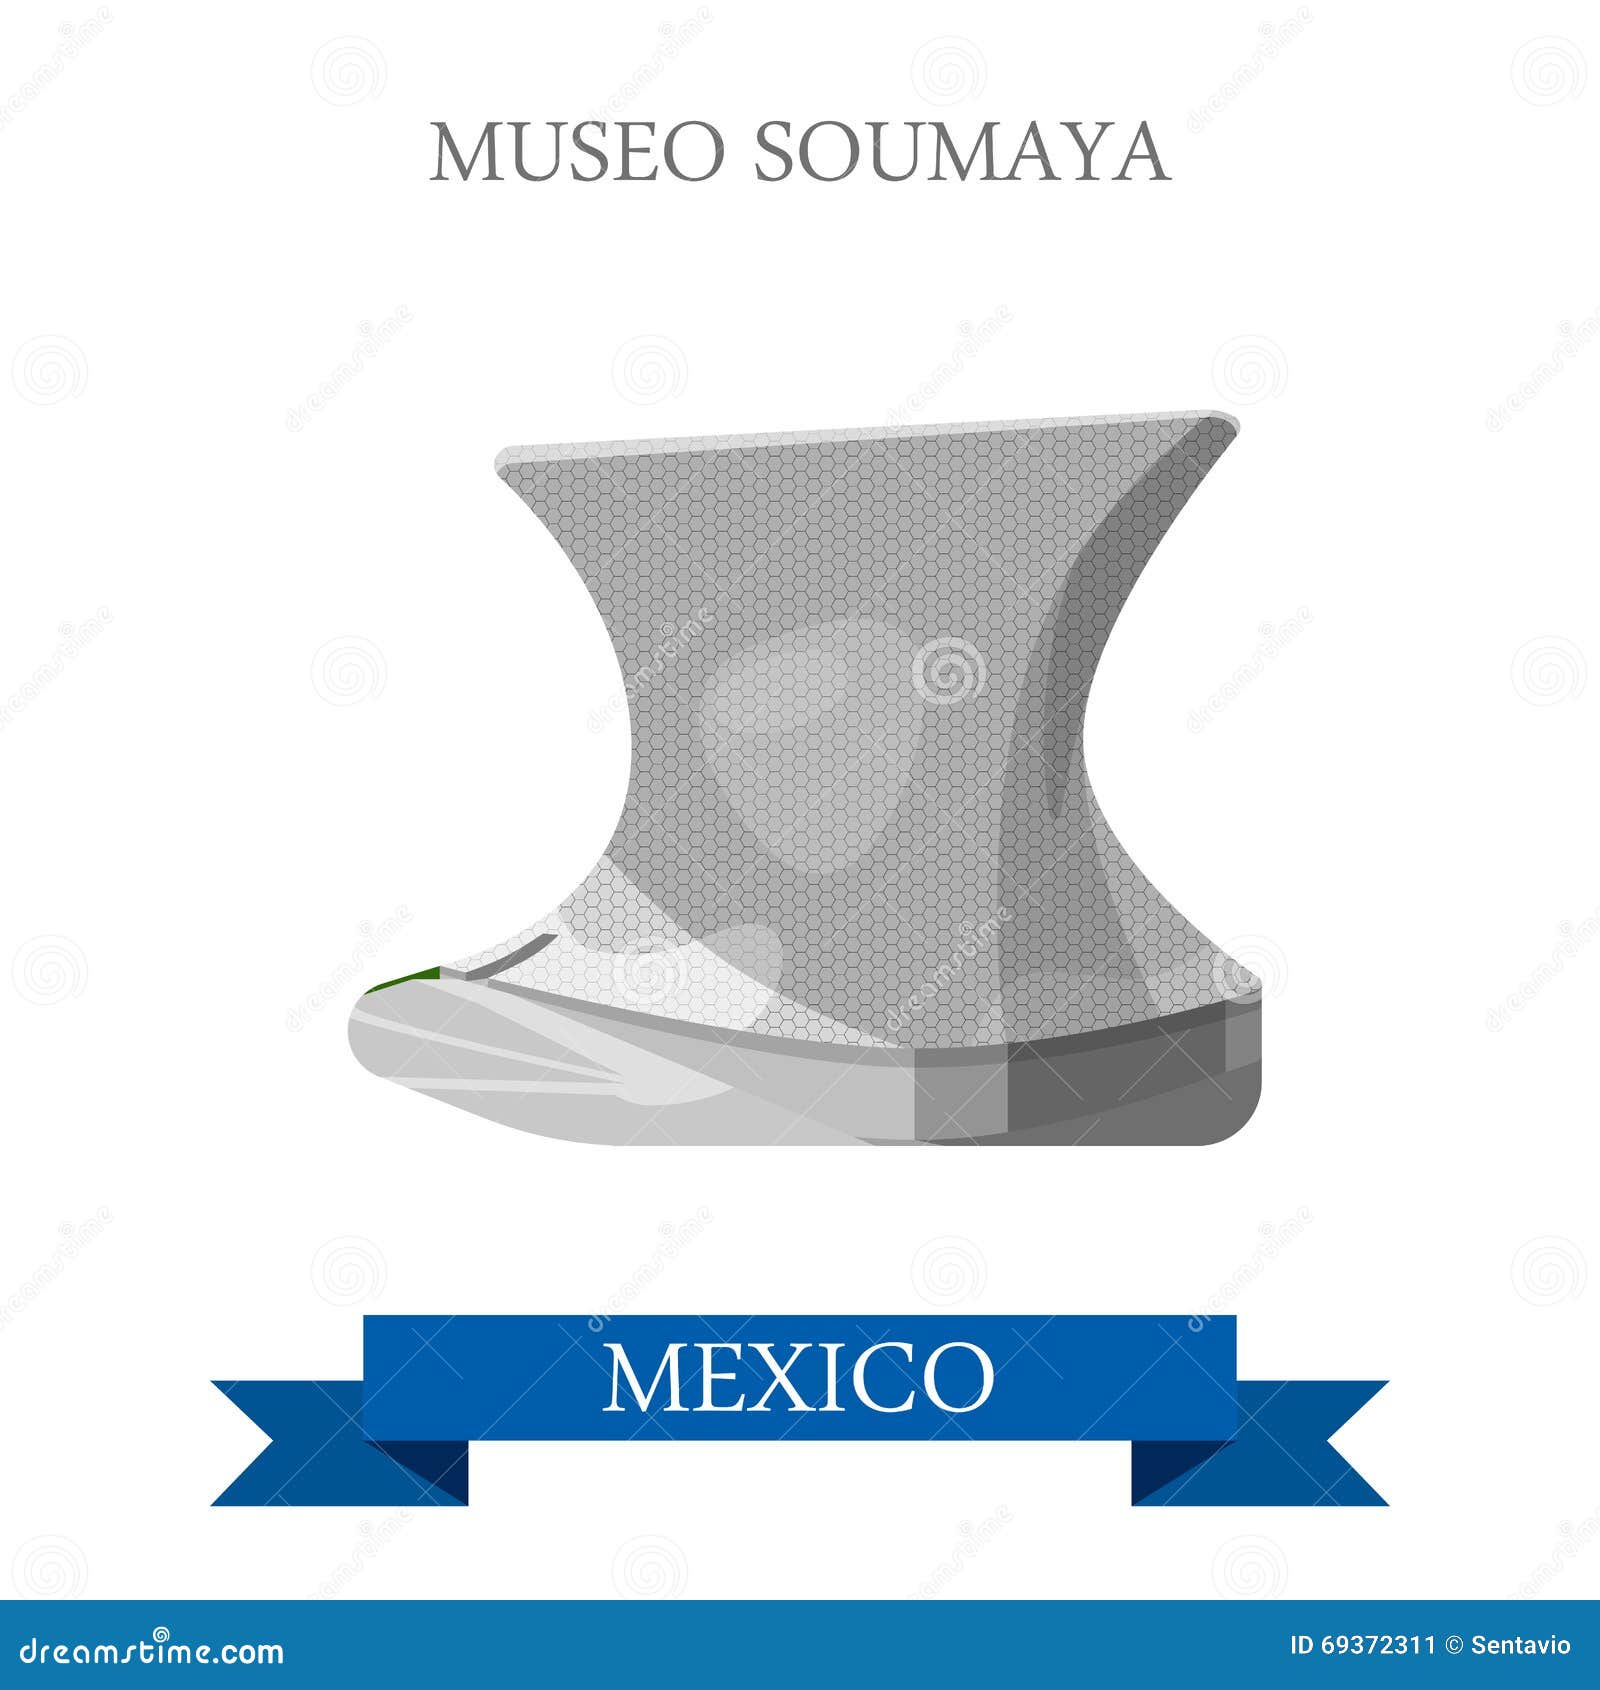 museo soumaya in mexico  flat attraction landmarks